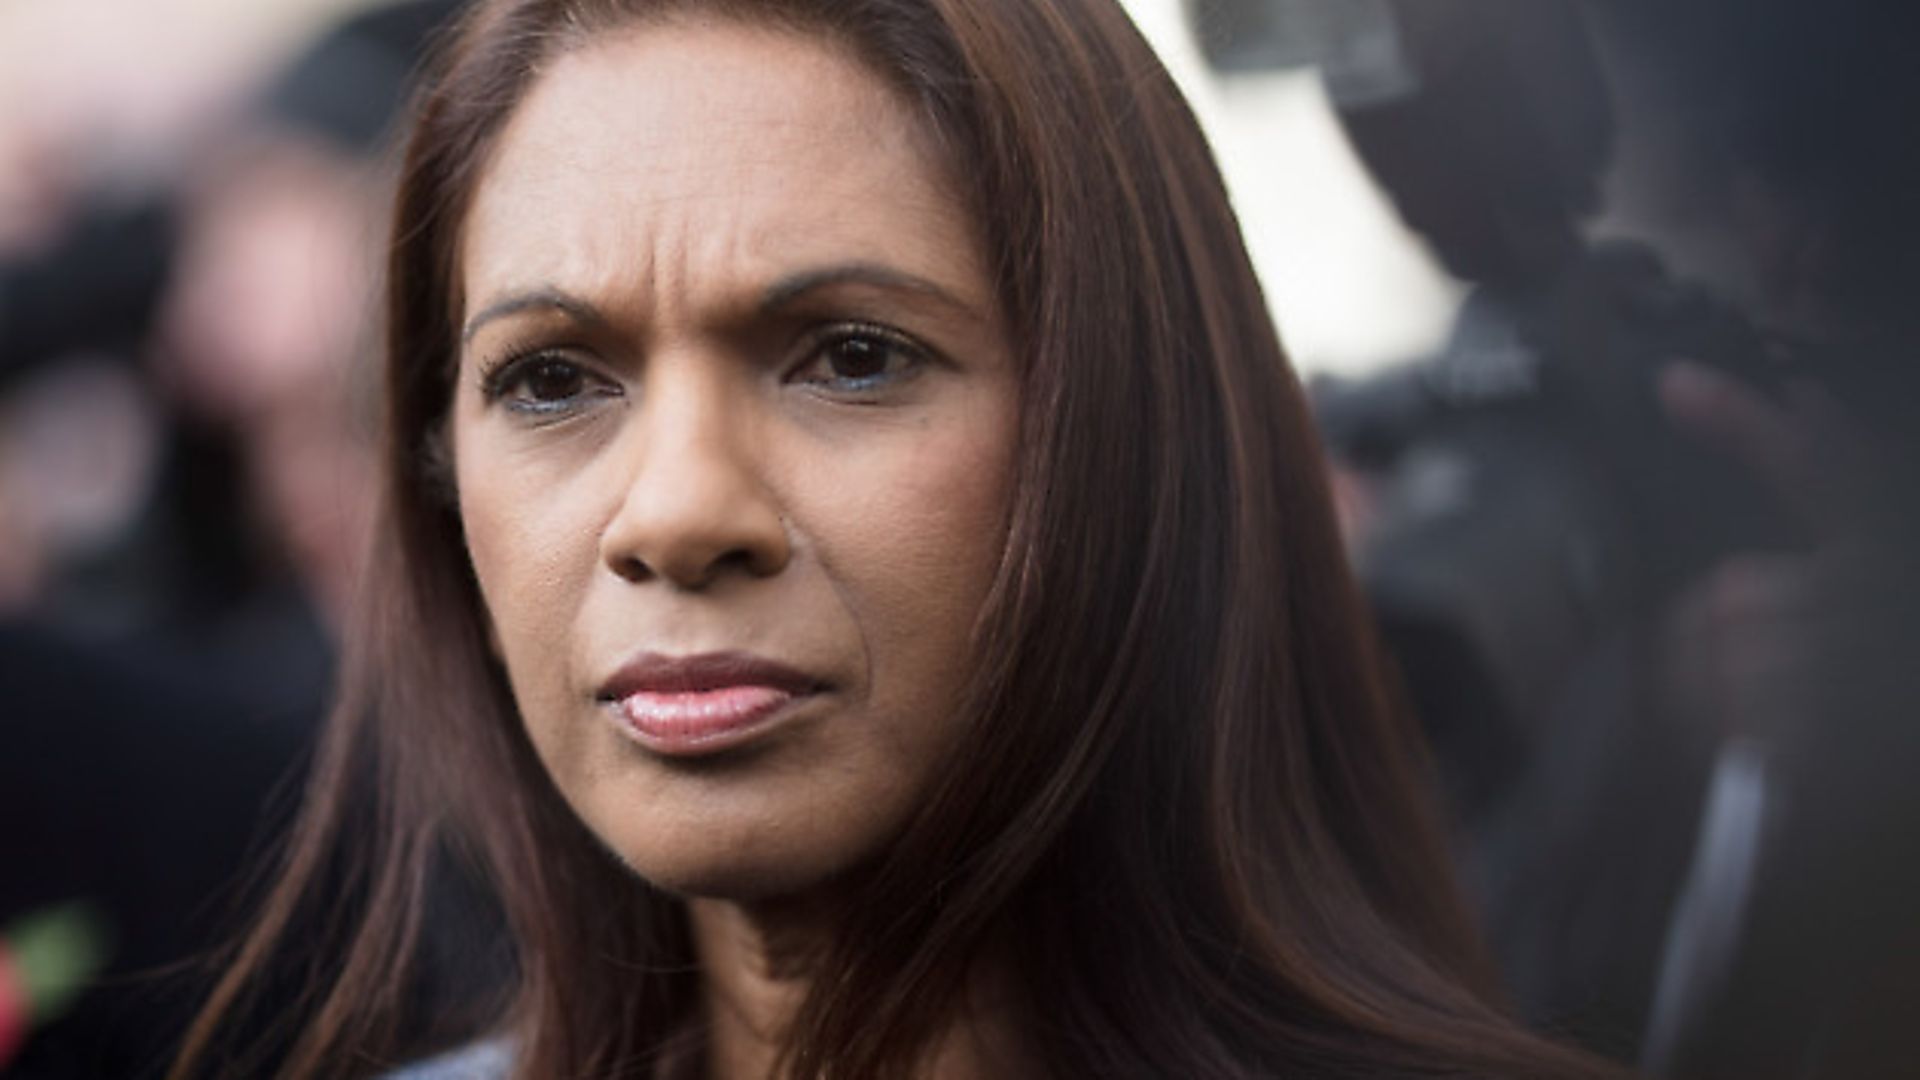 Gina Miller (Getty Images) - Credit: Bloomberg via Getty Images